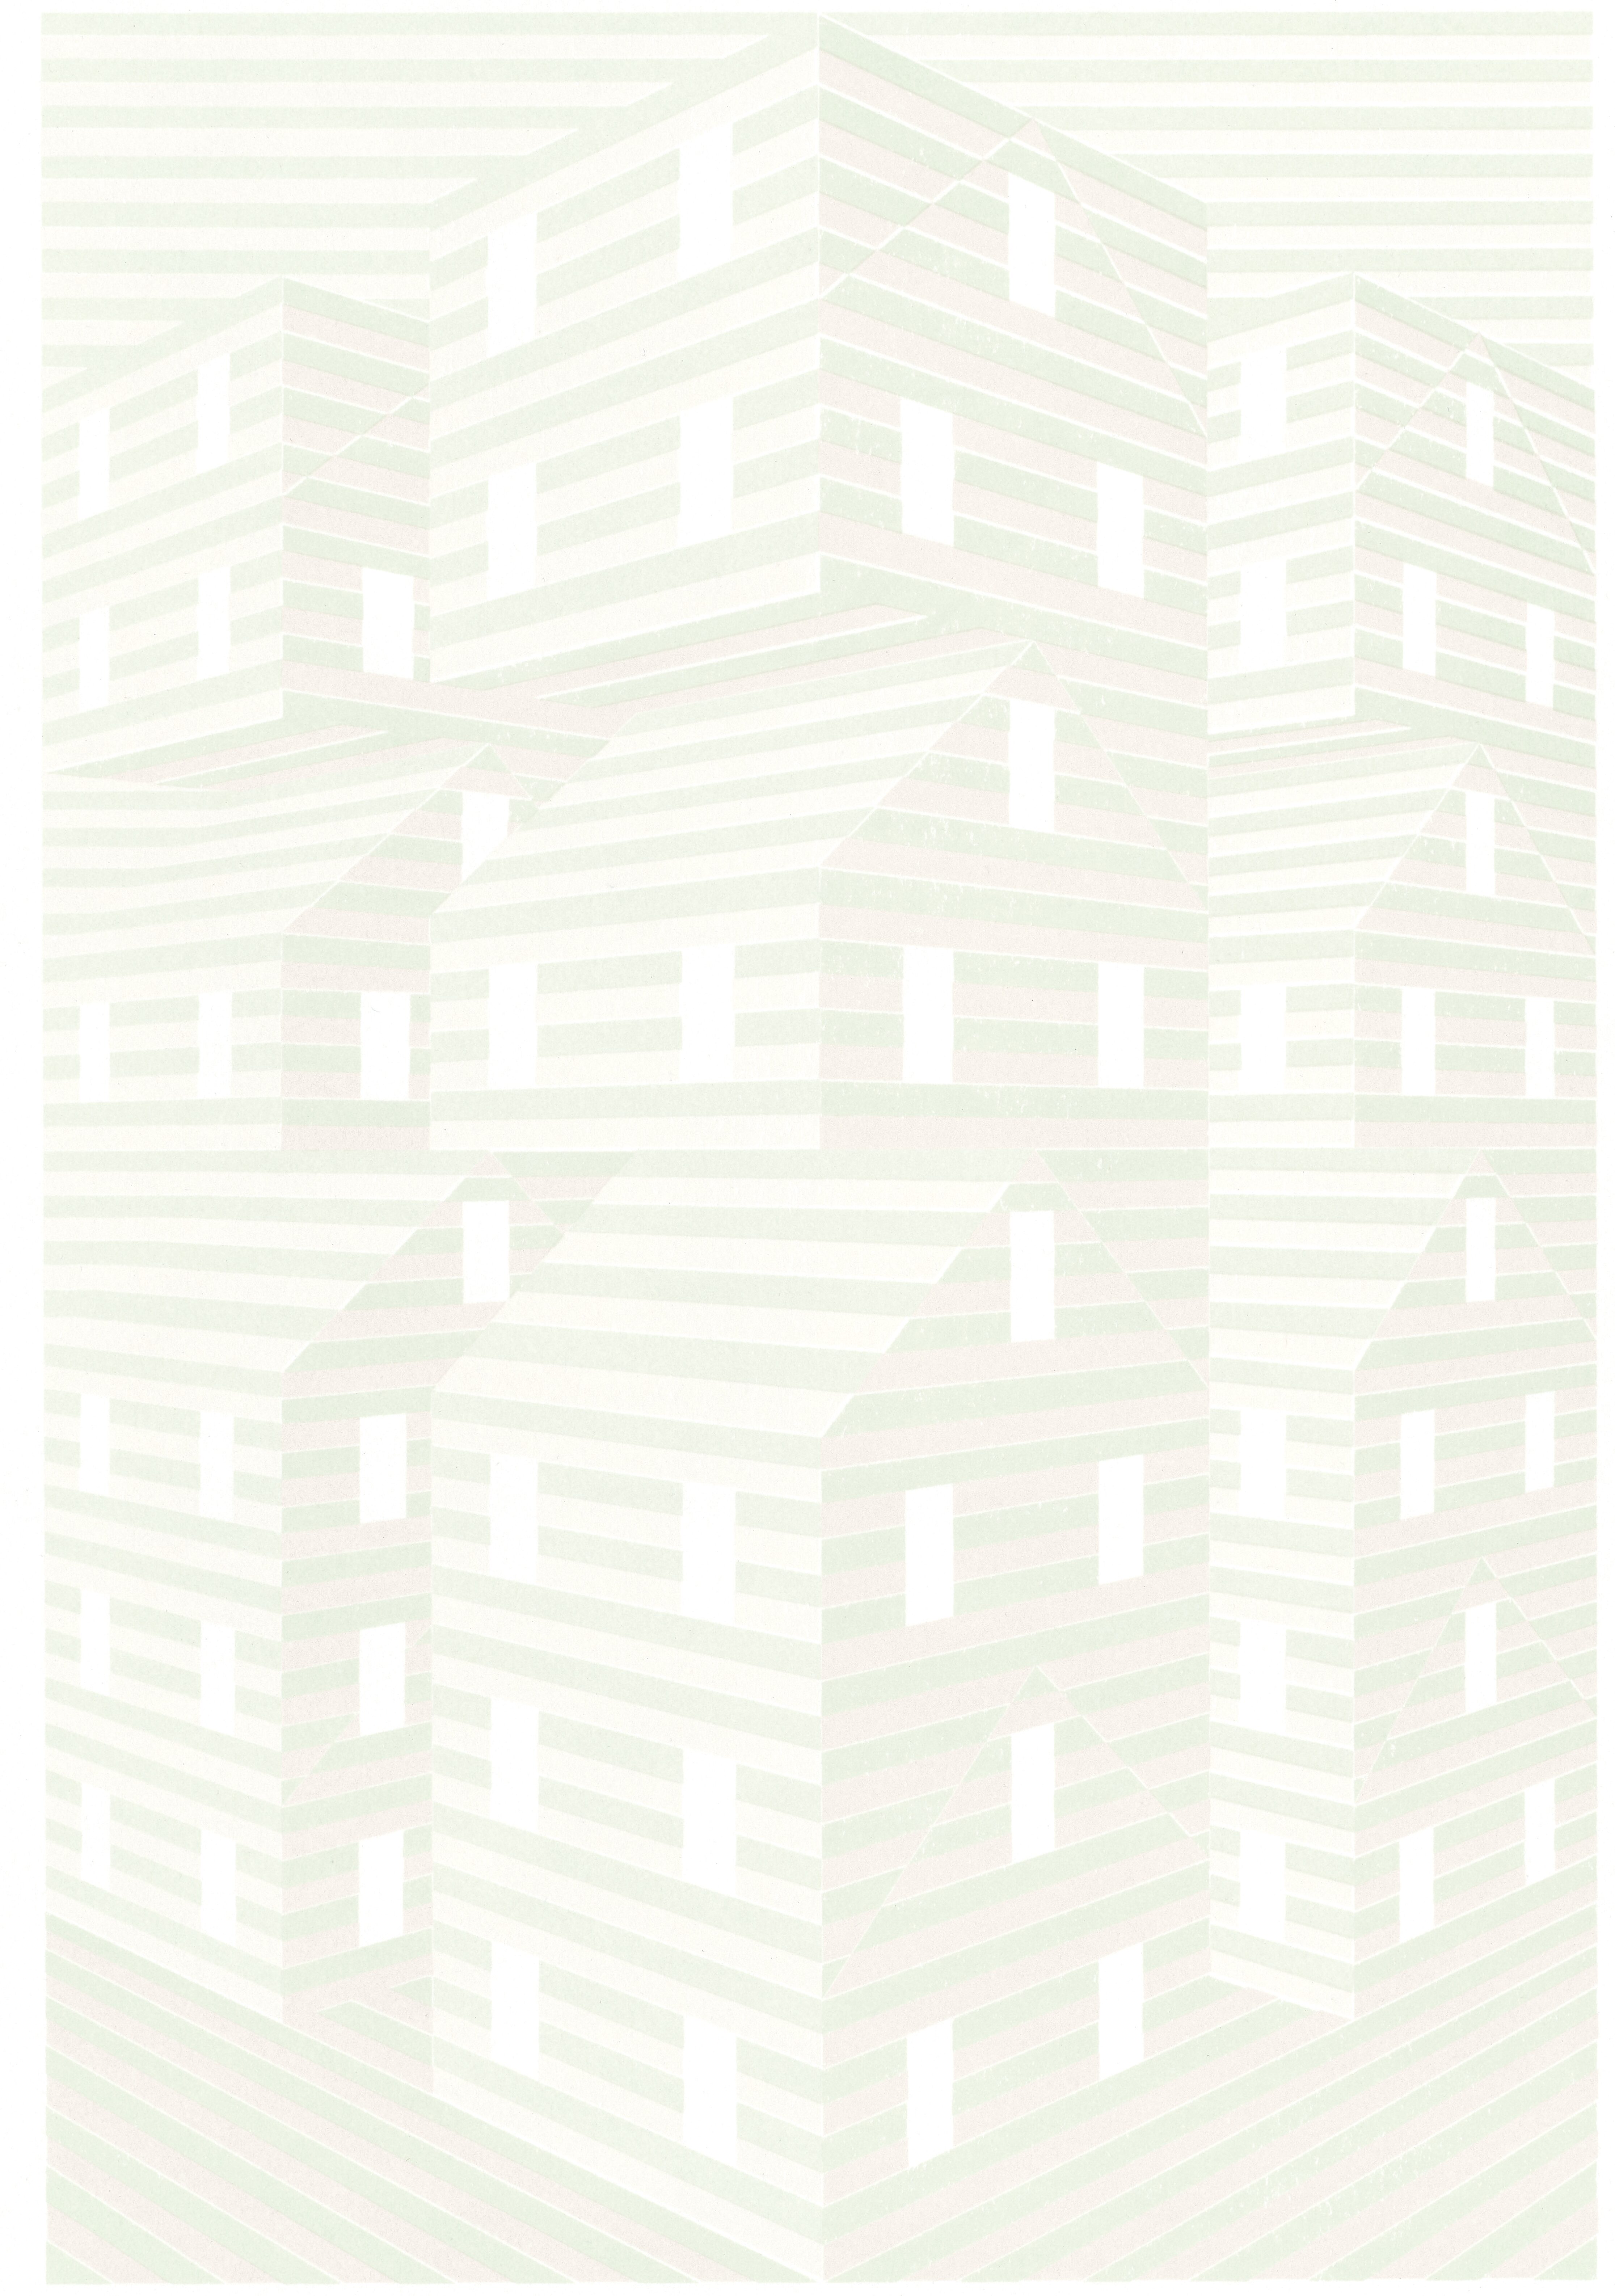 Image of light green, beige, and white screenprint of houses stacked on top of each other.